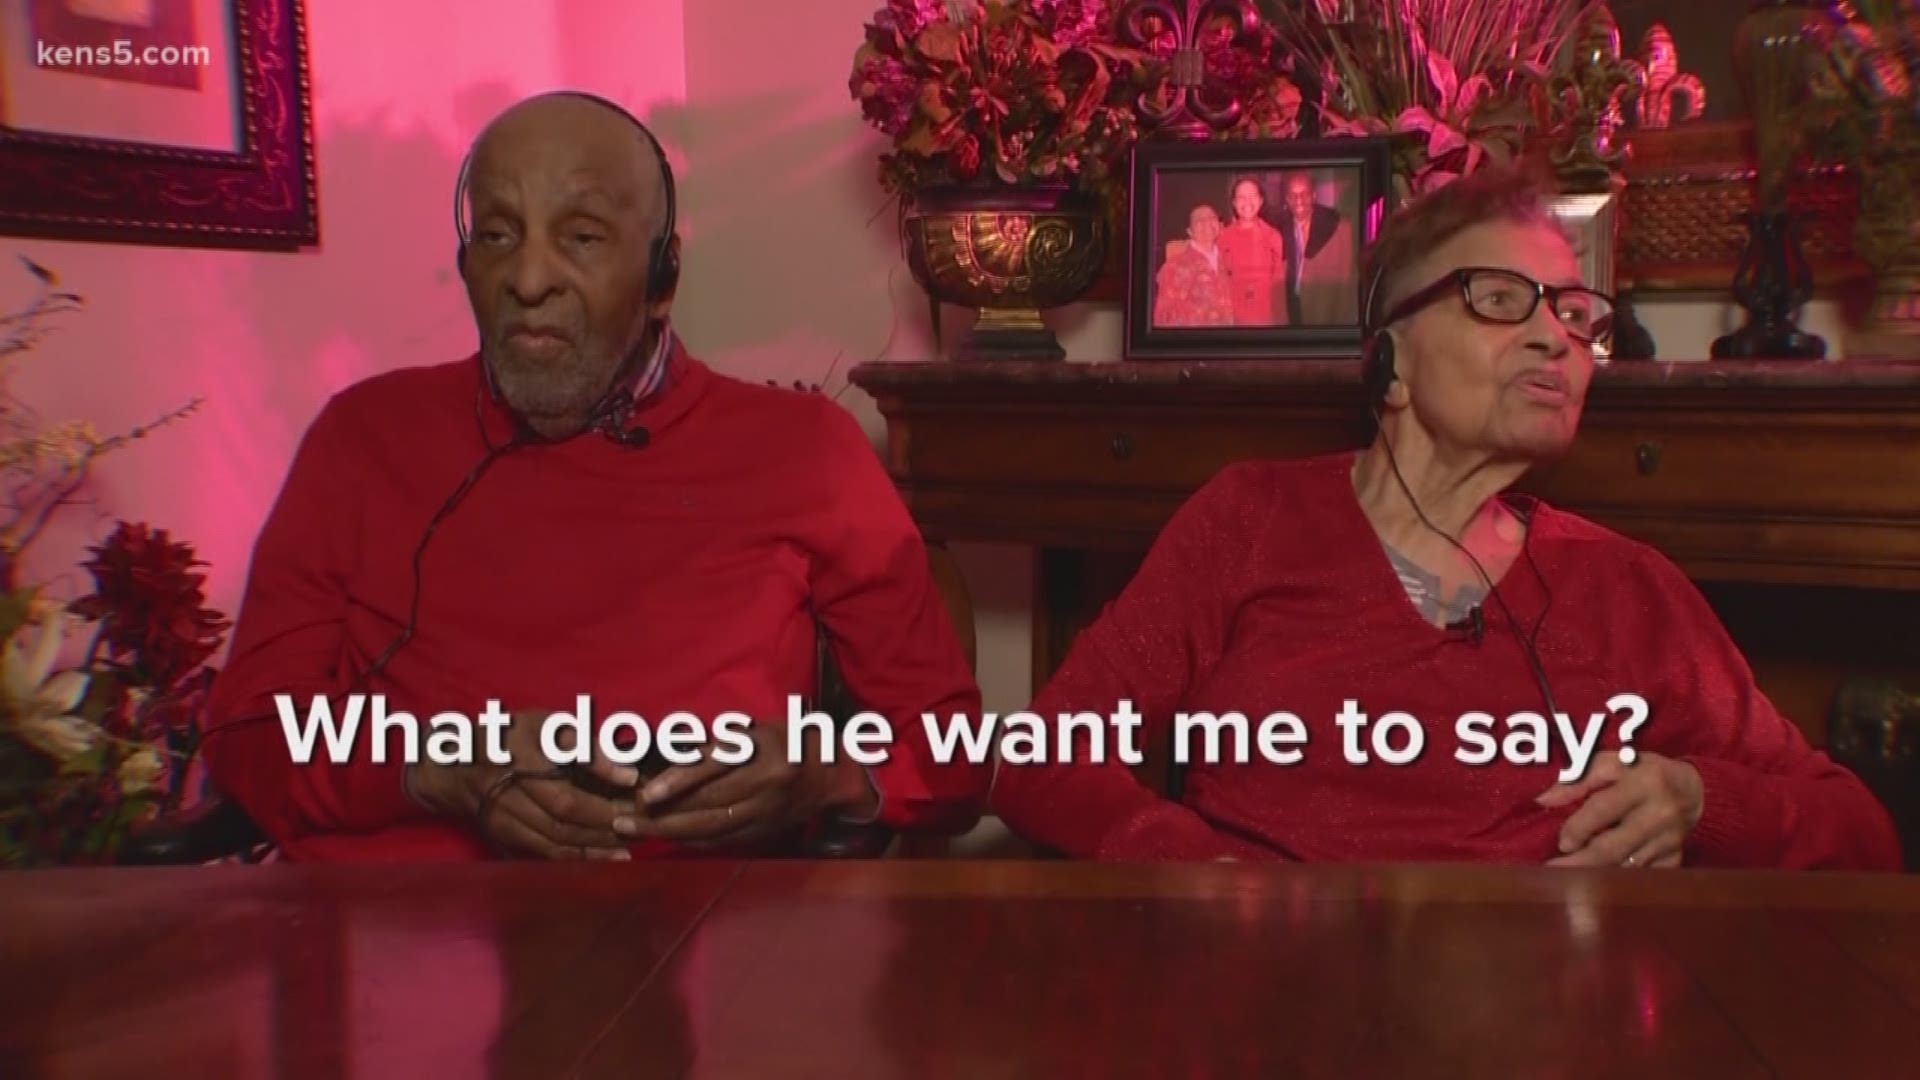 We met with two San Antonio couples who share their stories of old love and new.